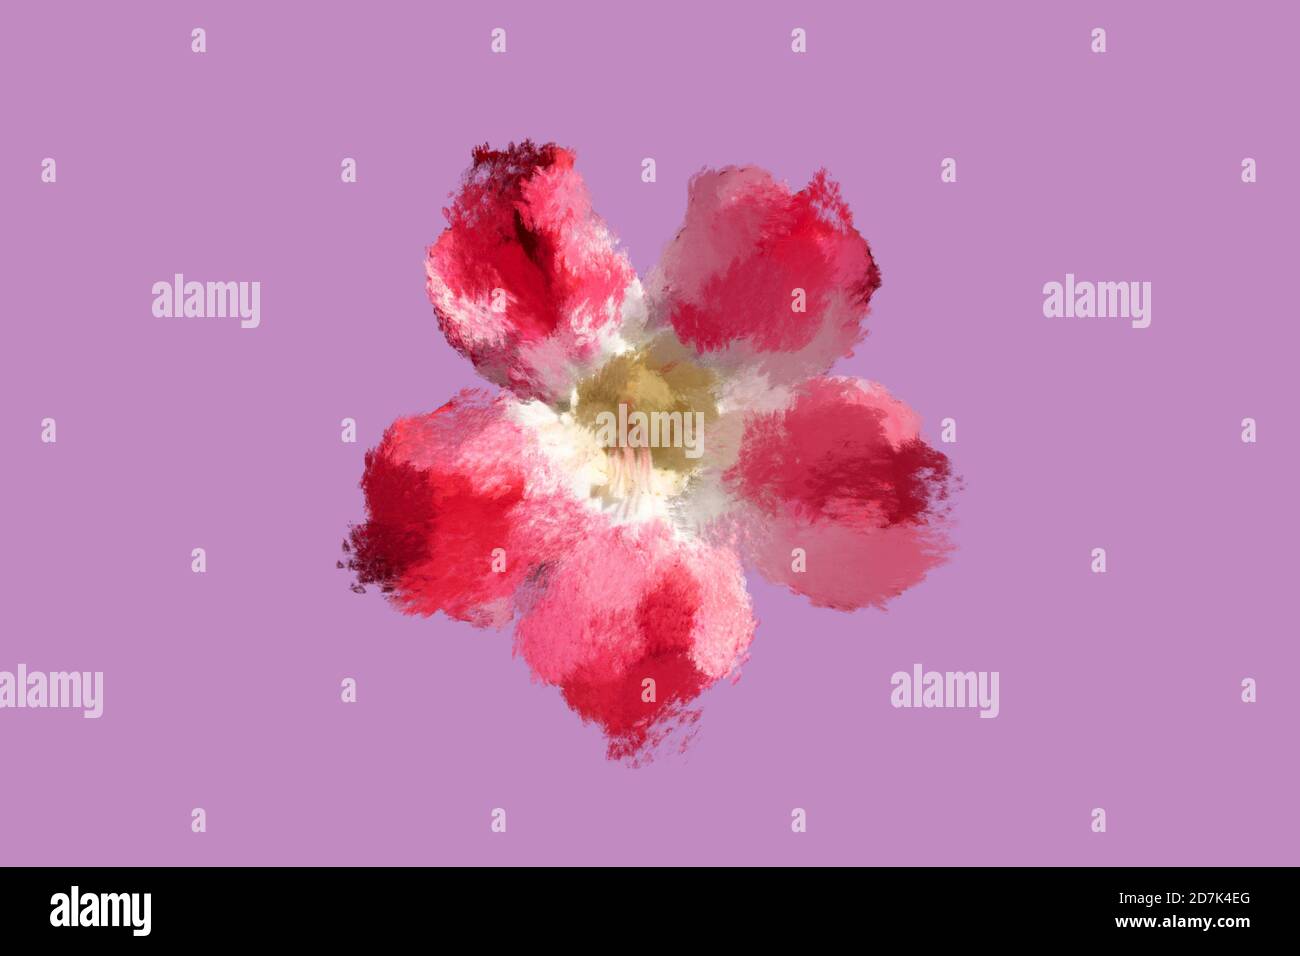 Digital painting of a flower with maroon, red and white colors on a mauve color background. A fuzzy colorful flower made using digital platform. Stock Photo